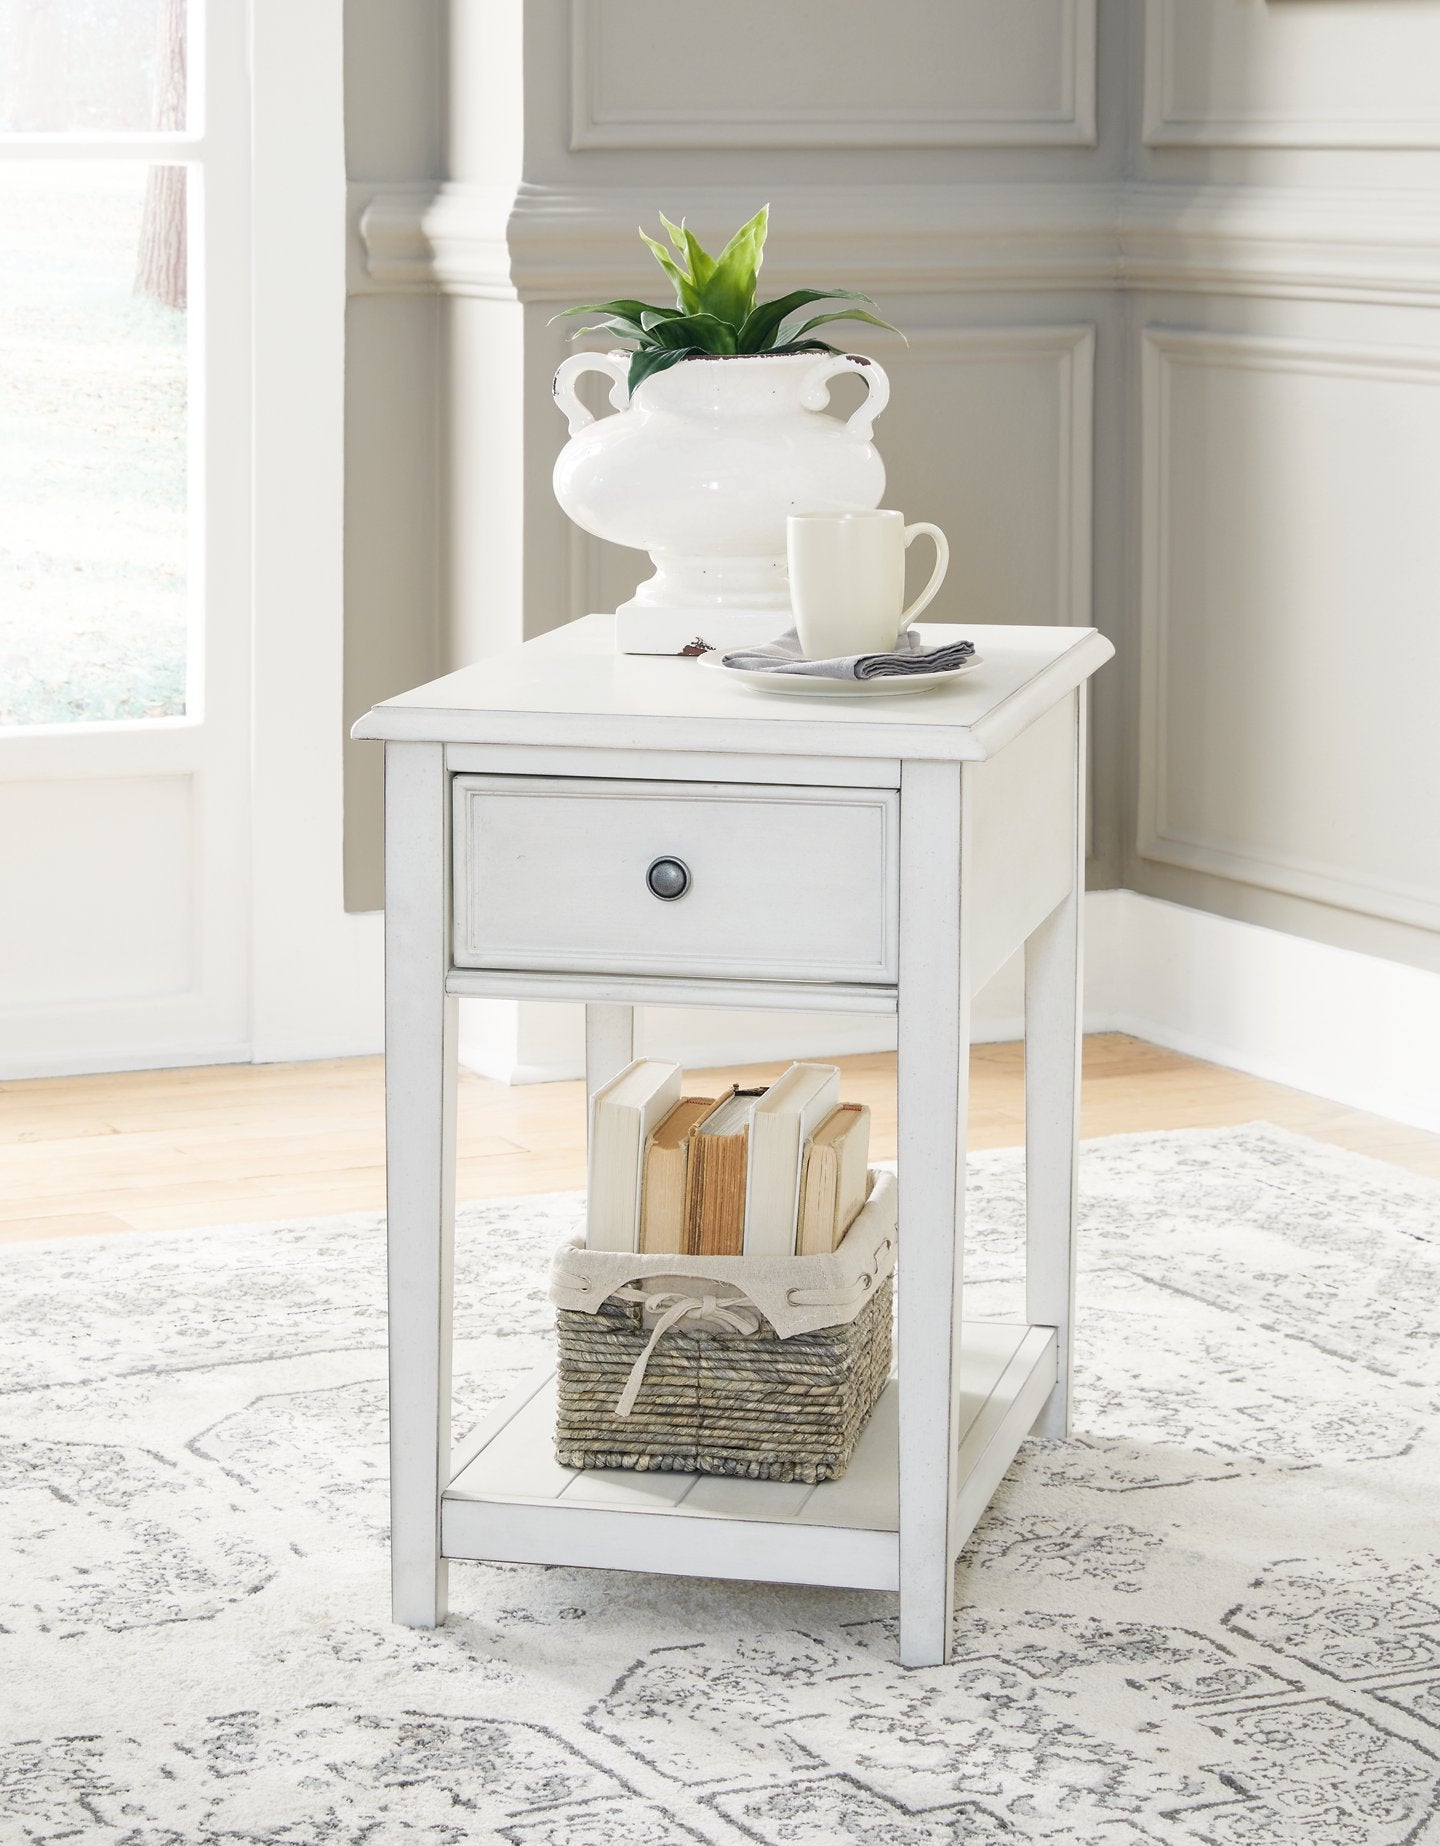 Kanwyn 3-Piece Occasional Table Package